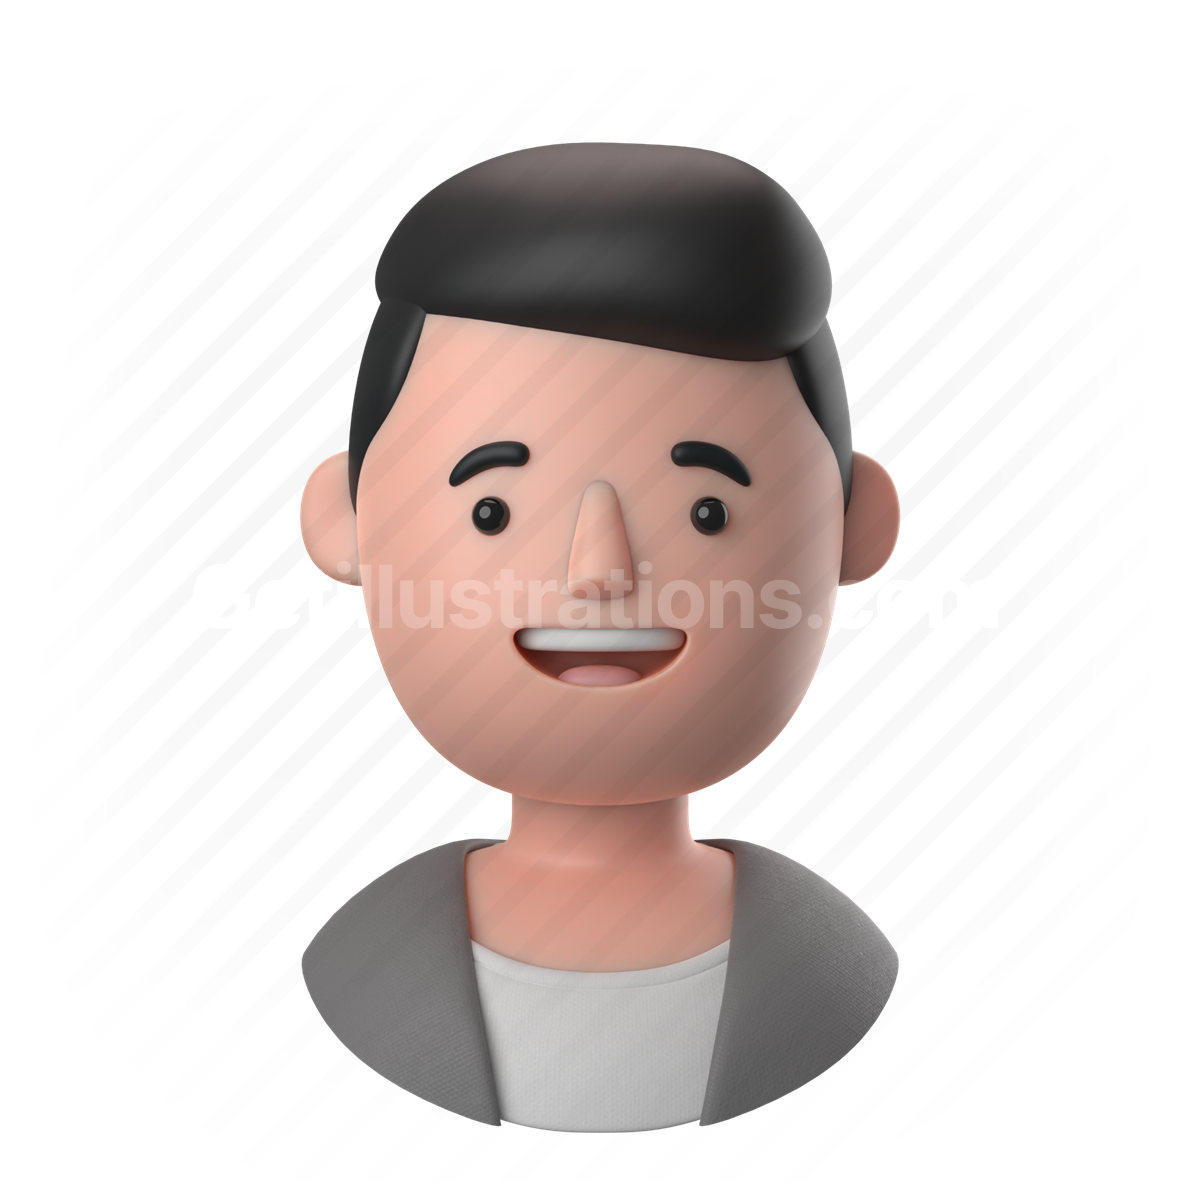 Download 3D Avatar illustrations library